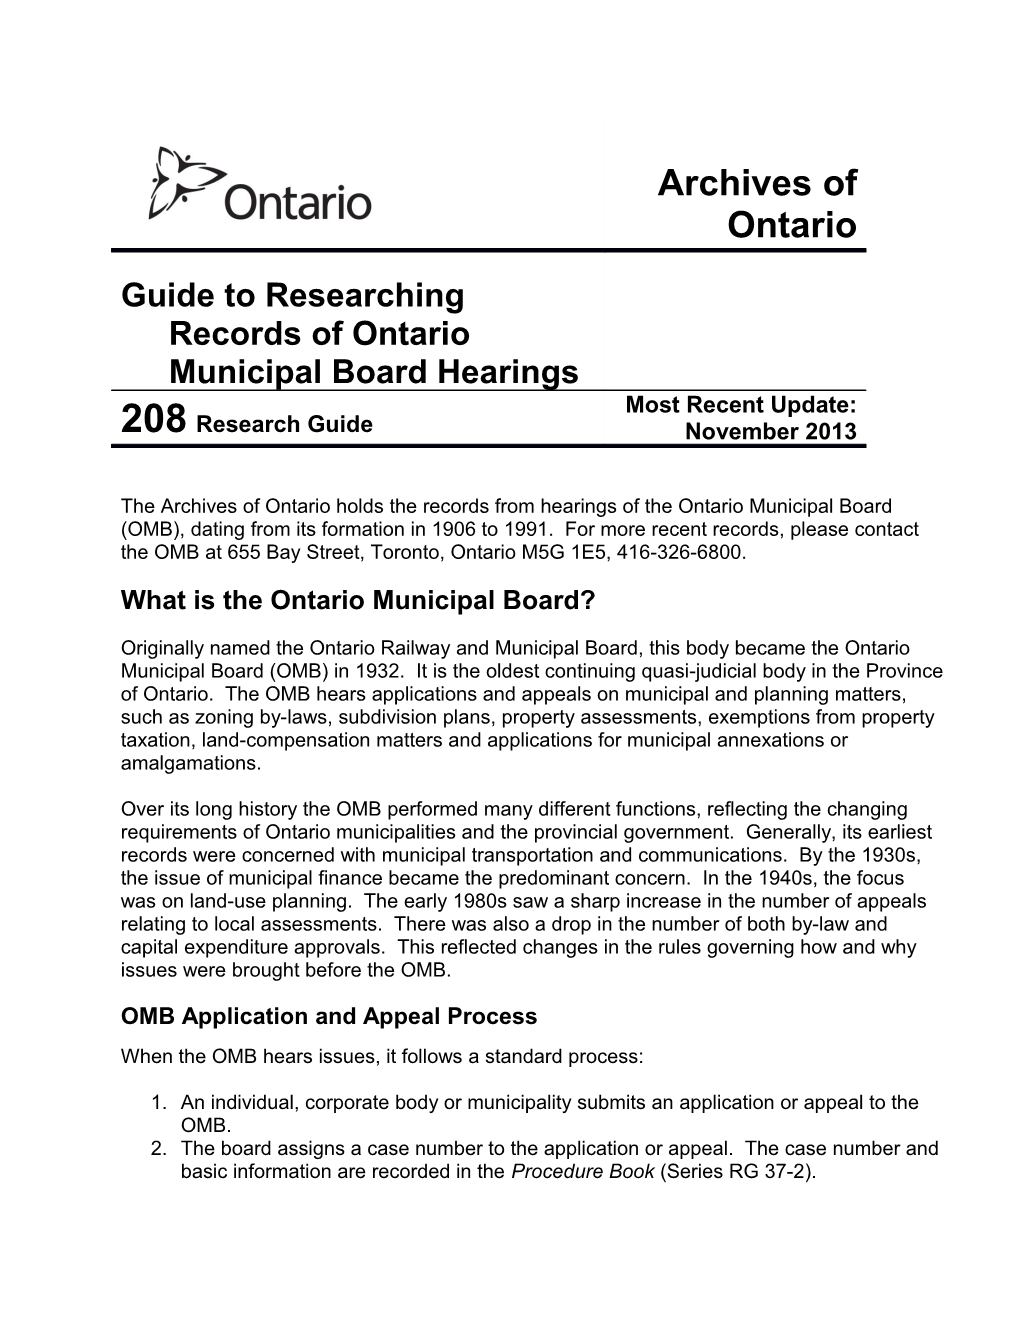 Guide to Researching Records of Ontario Municipal Board Hearings